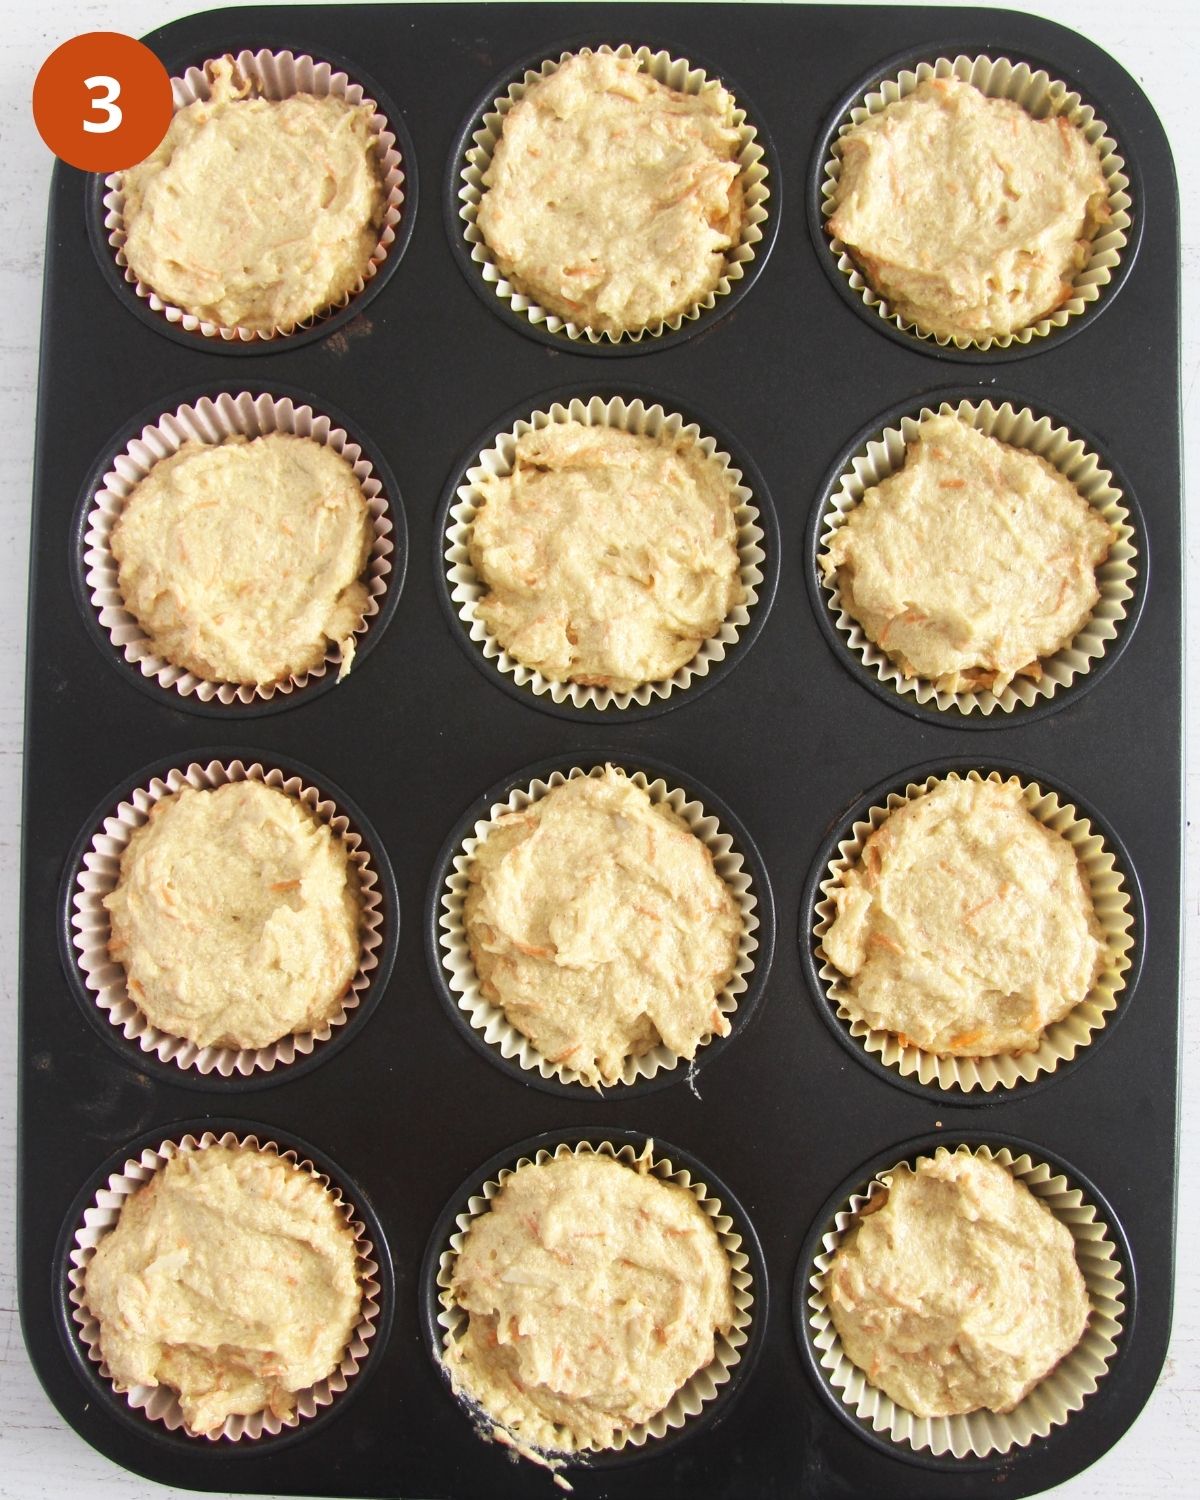 carrot and banana muffins in a muffin pan before baking.